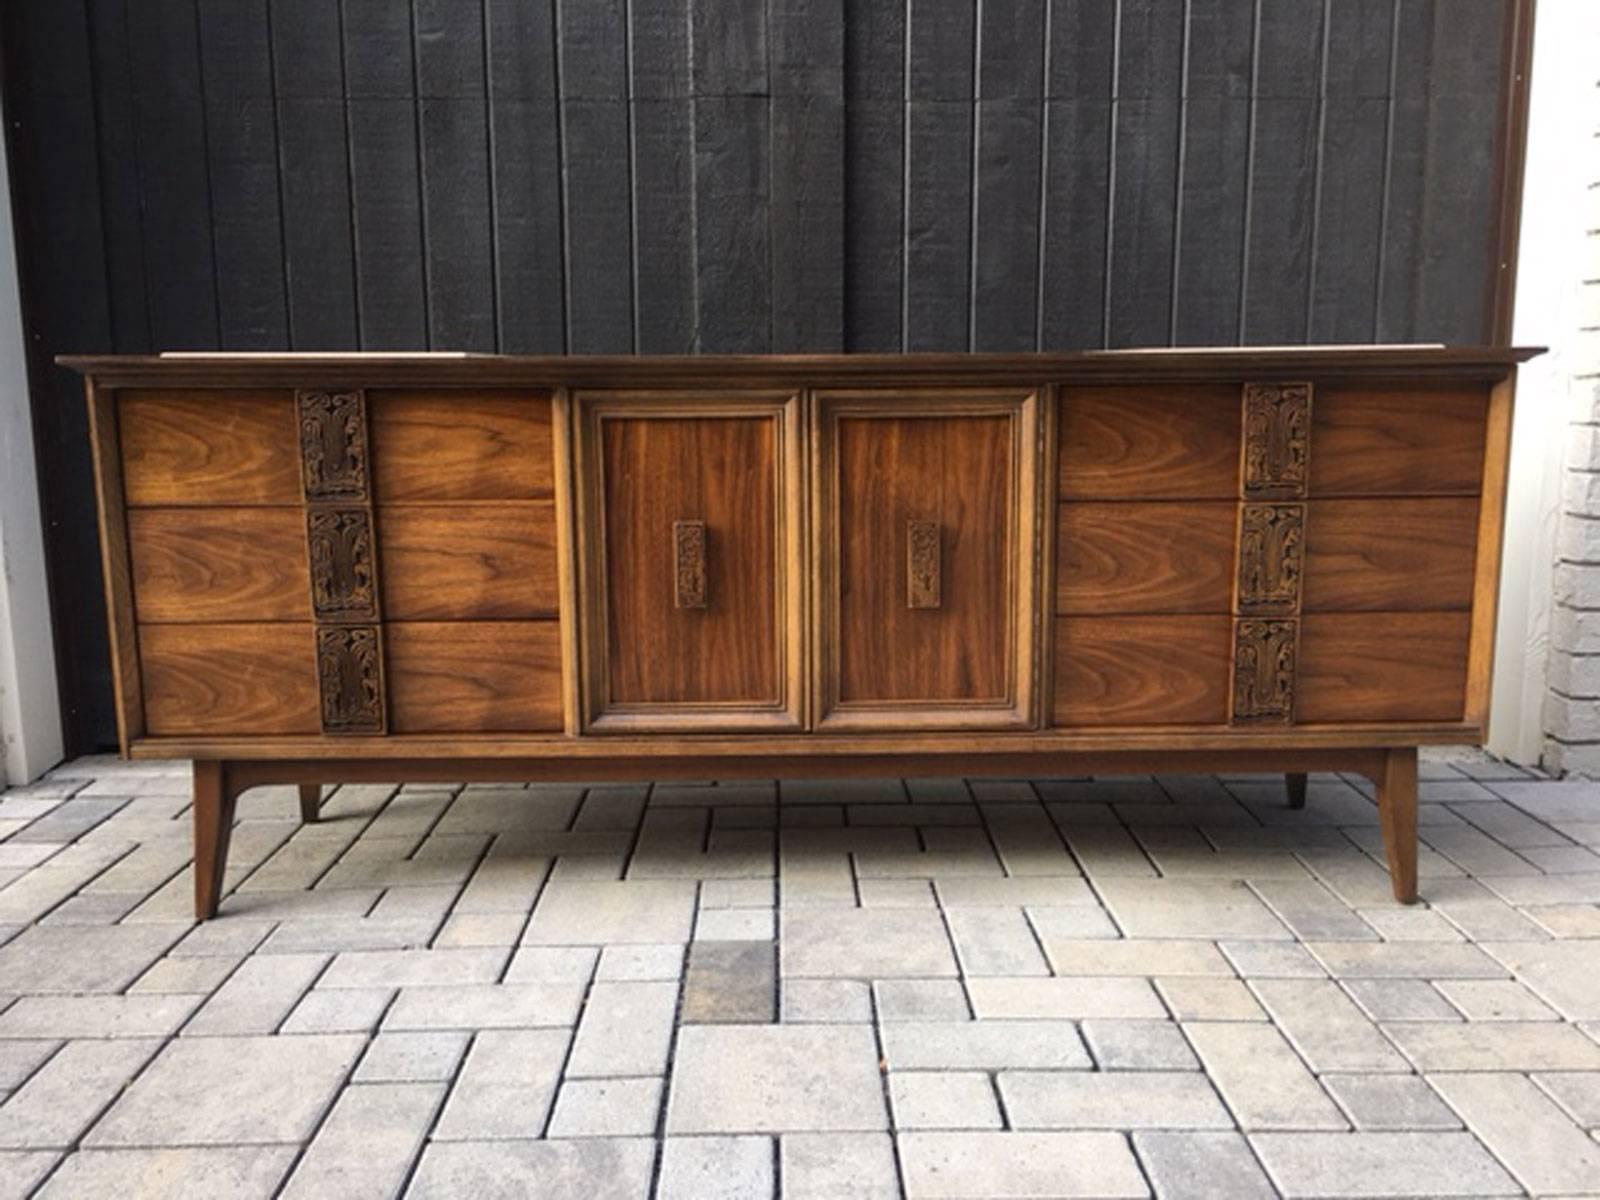 Exquisite nine drawer dresser in walnut from the Mayan group by Bassett.  Expertly refinished.  This dresser includes two inset stone pieces that are perfect for displaying two lamps or pieces of art while eliminating the worry of scratching the